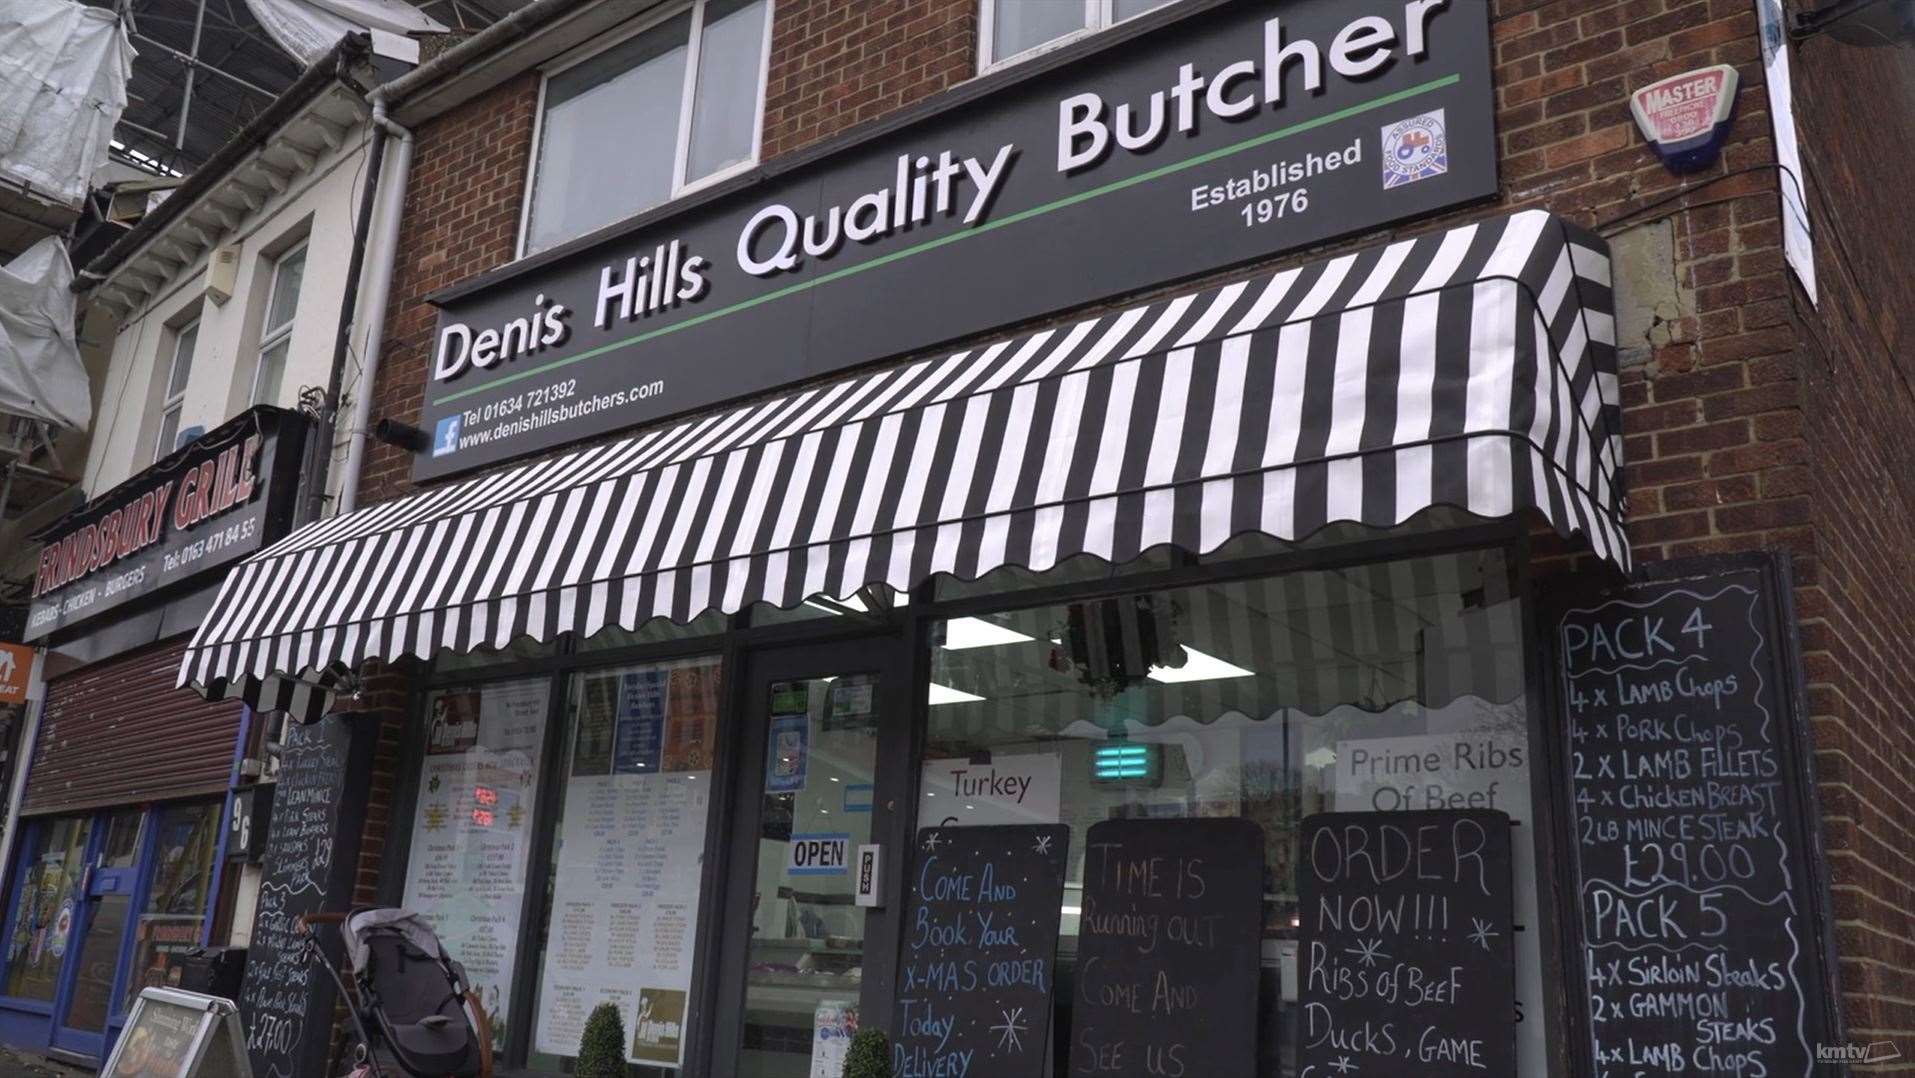 Denis Hills Quality Butcher, which has operated for nearly 50 years, has been saved by customers in a month of record sales